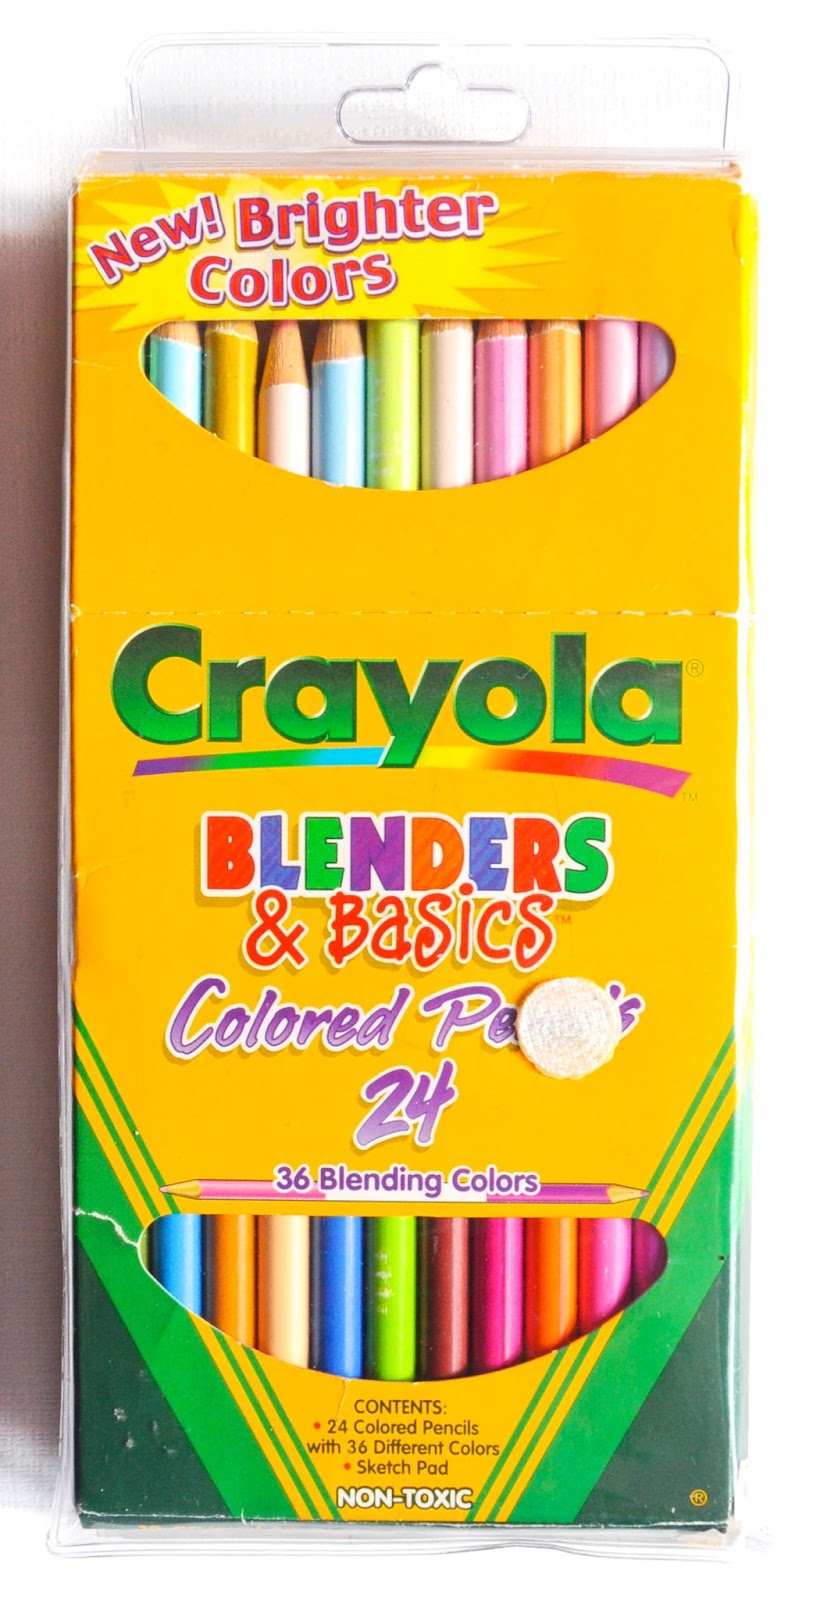 Crayola Blenders and Basics Colored Pencils: What's Inside the Box